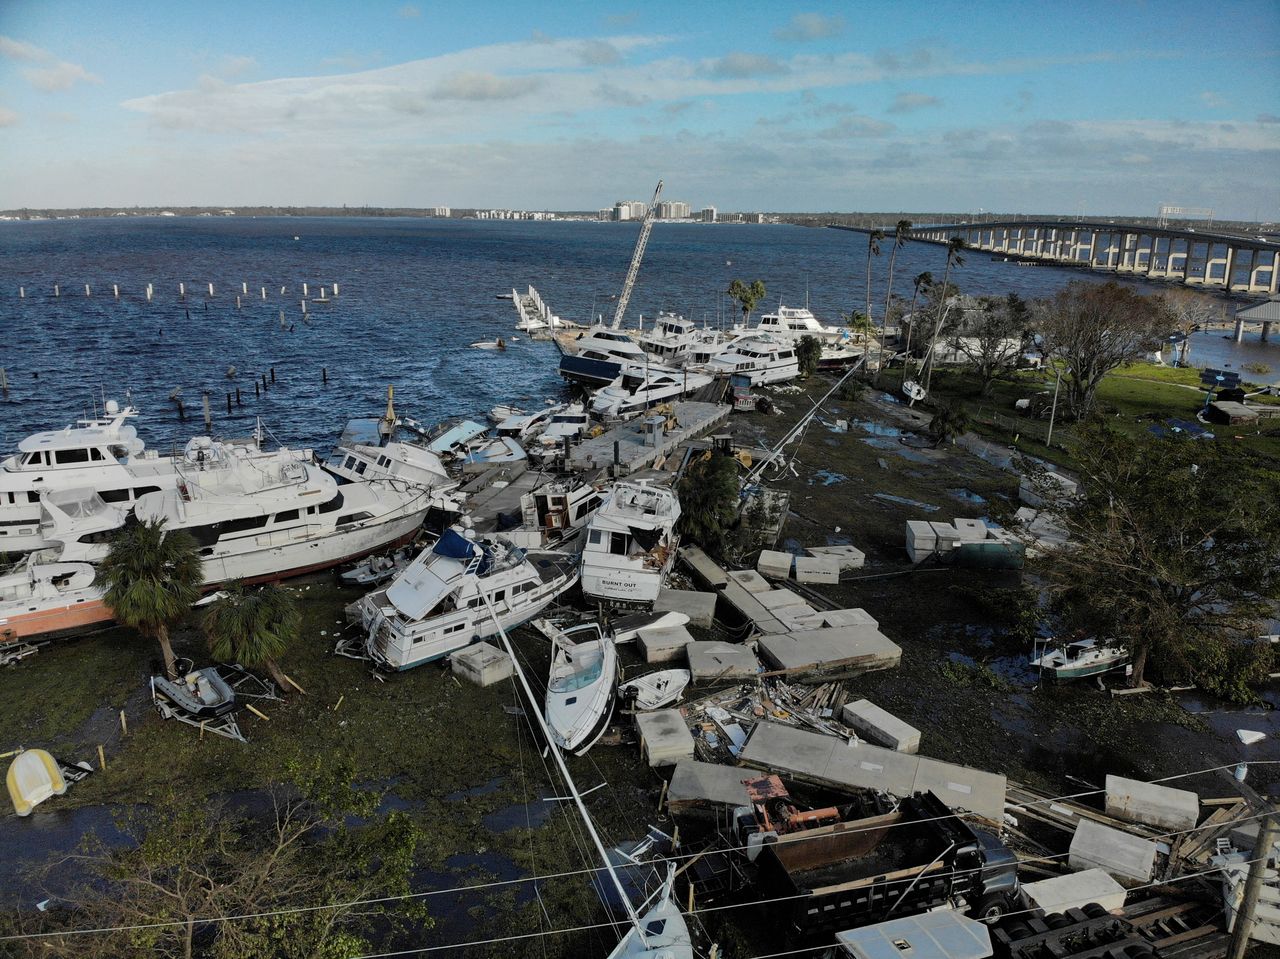 Damaged boats are seen after Hurricane Ian caused widespread destruction in Fort Myers on Thursday.